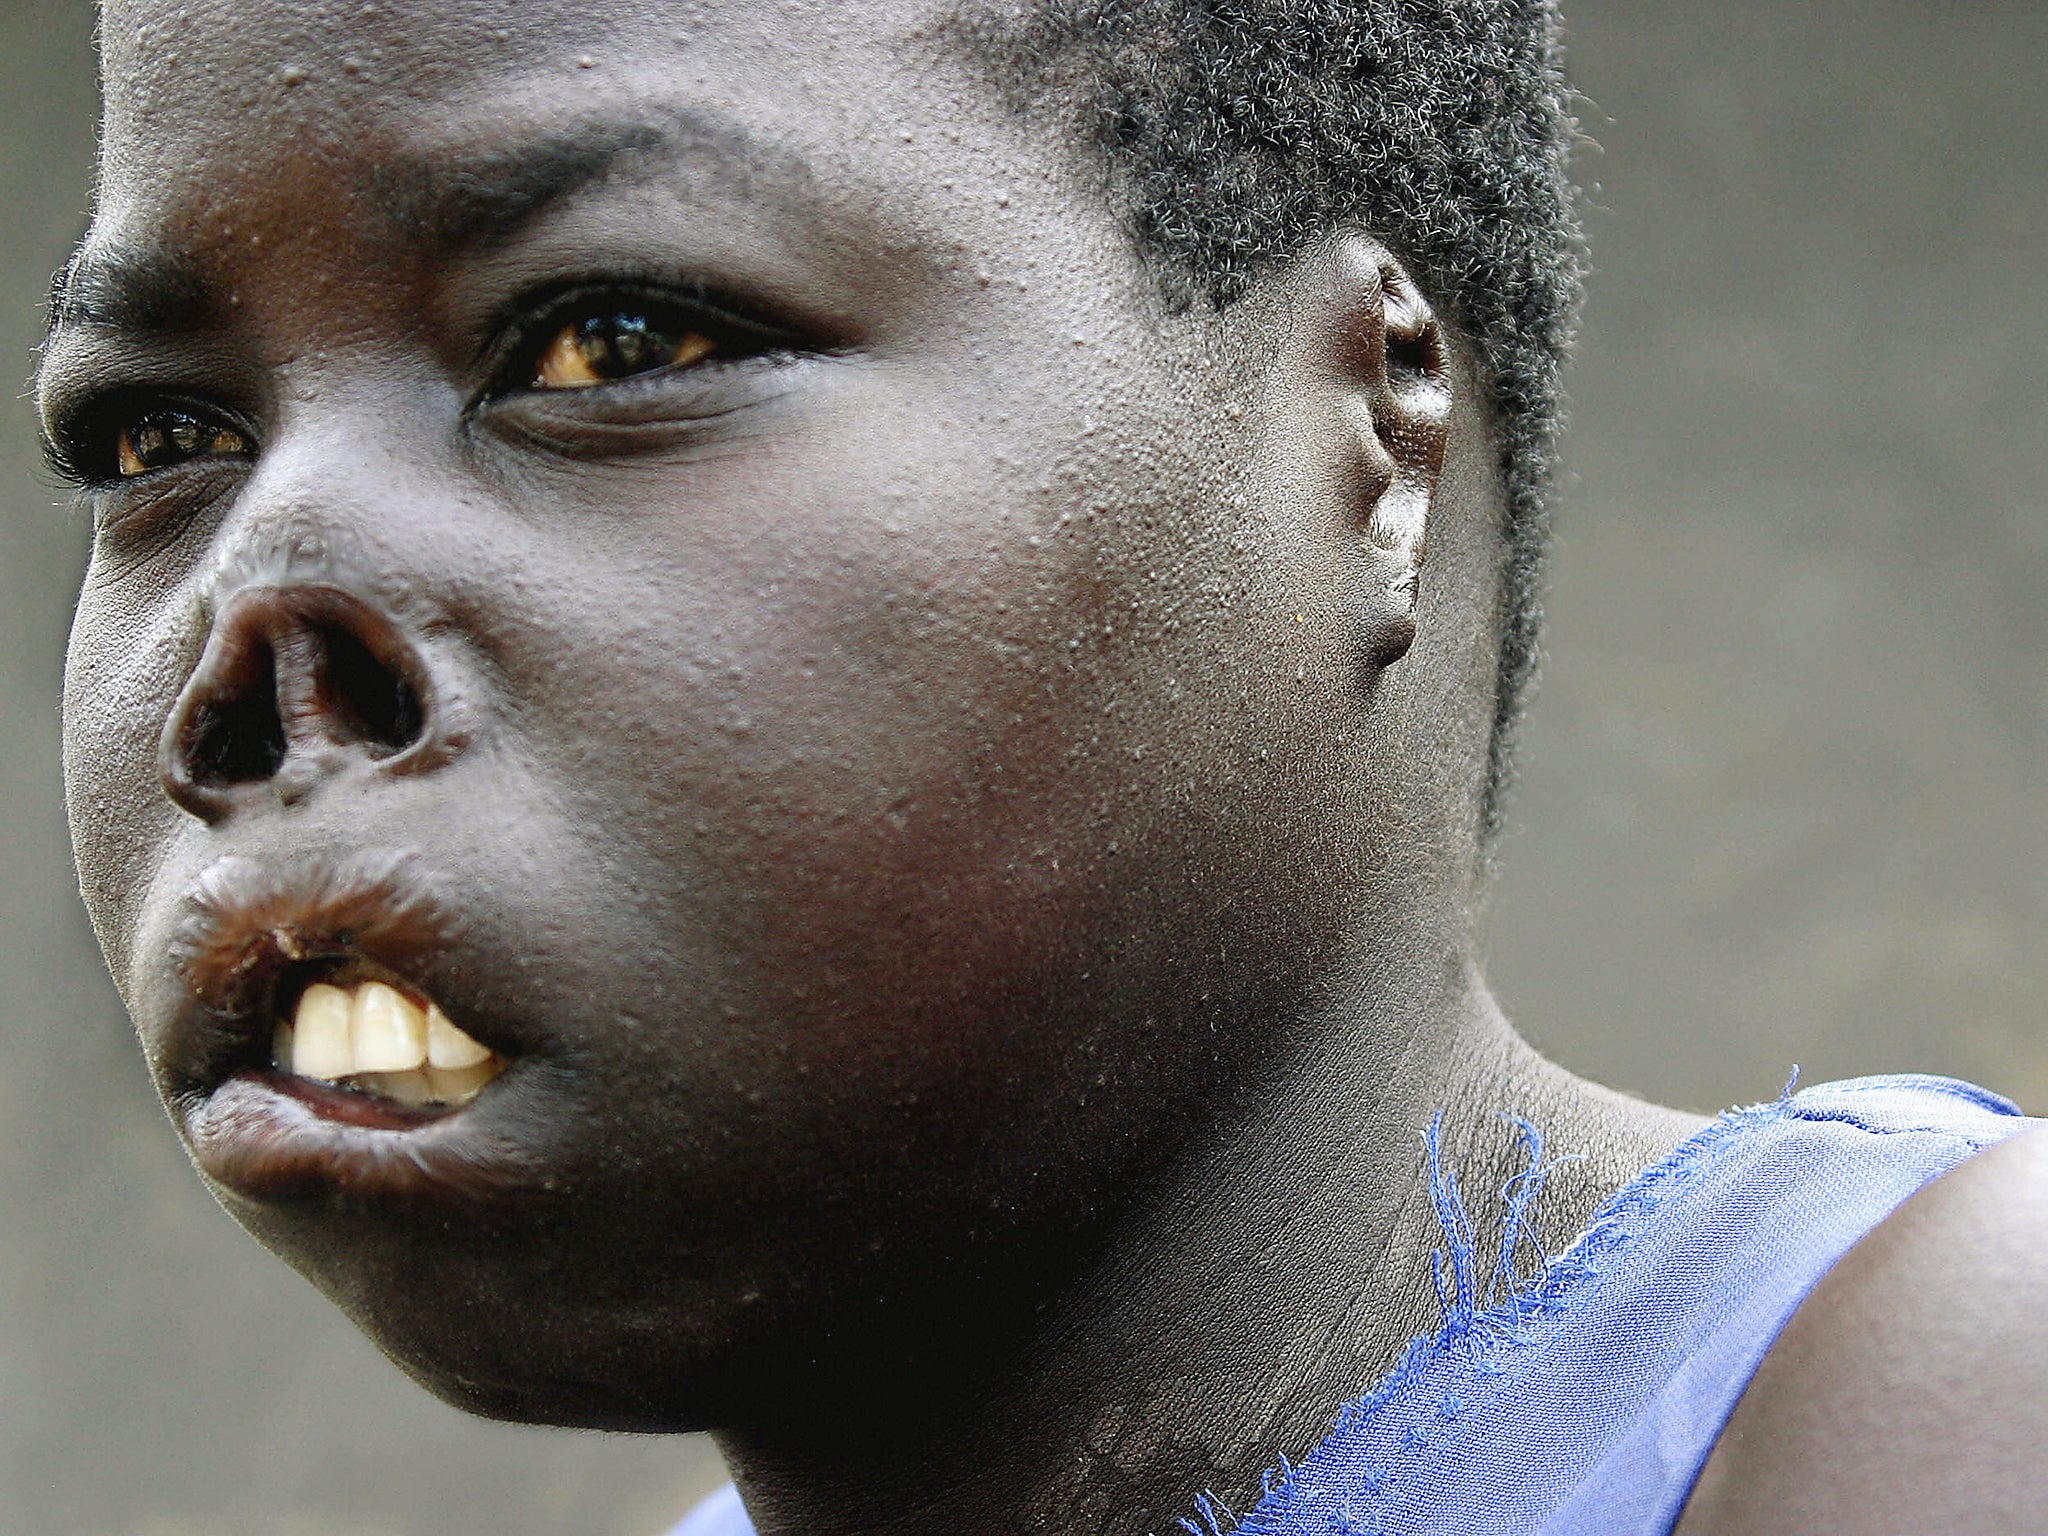 Auma Consolata was abducted by the LRA – who cut off her lips, ears and nose – in 2005, aged 17 (Getty)